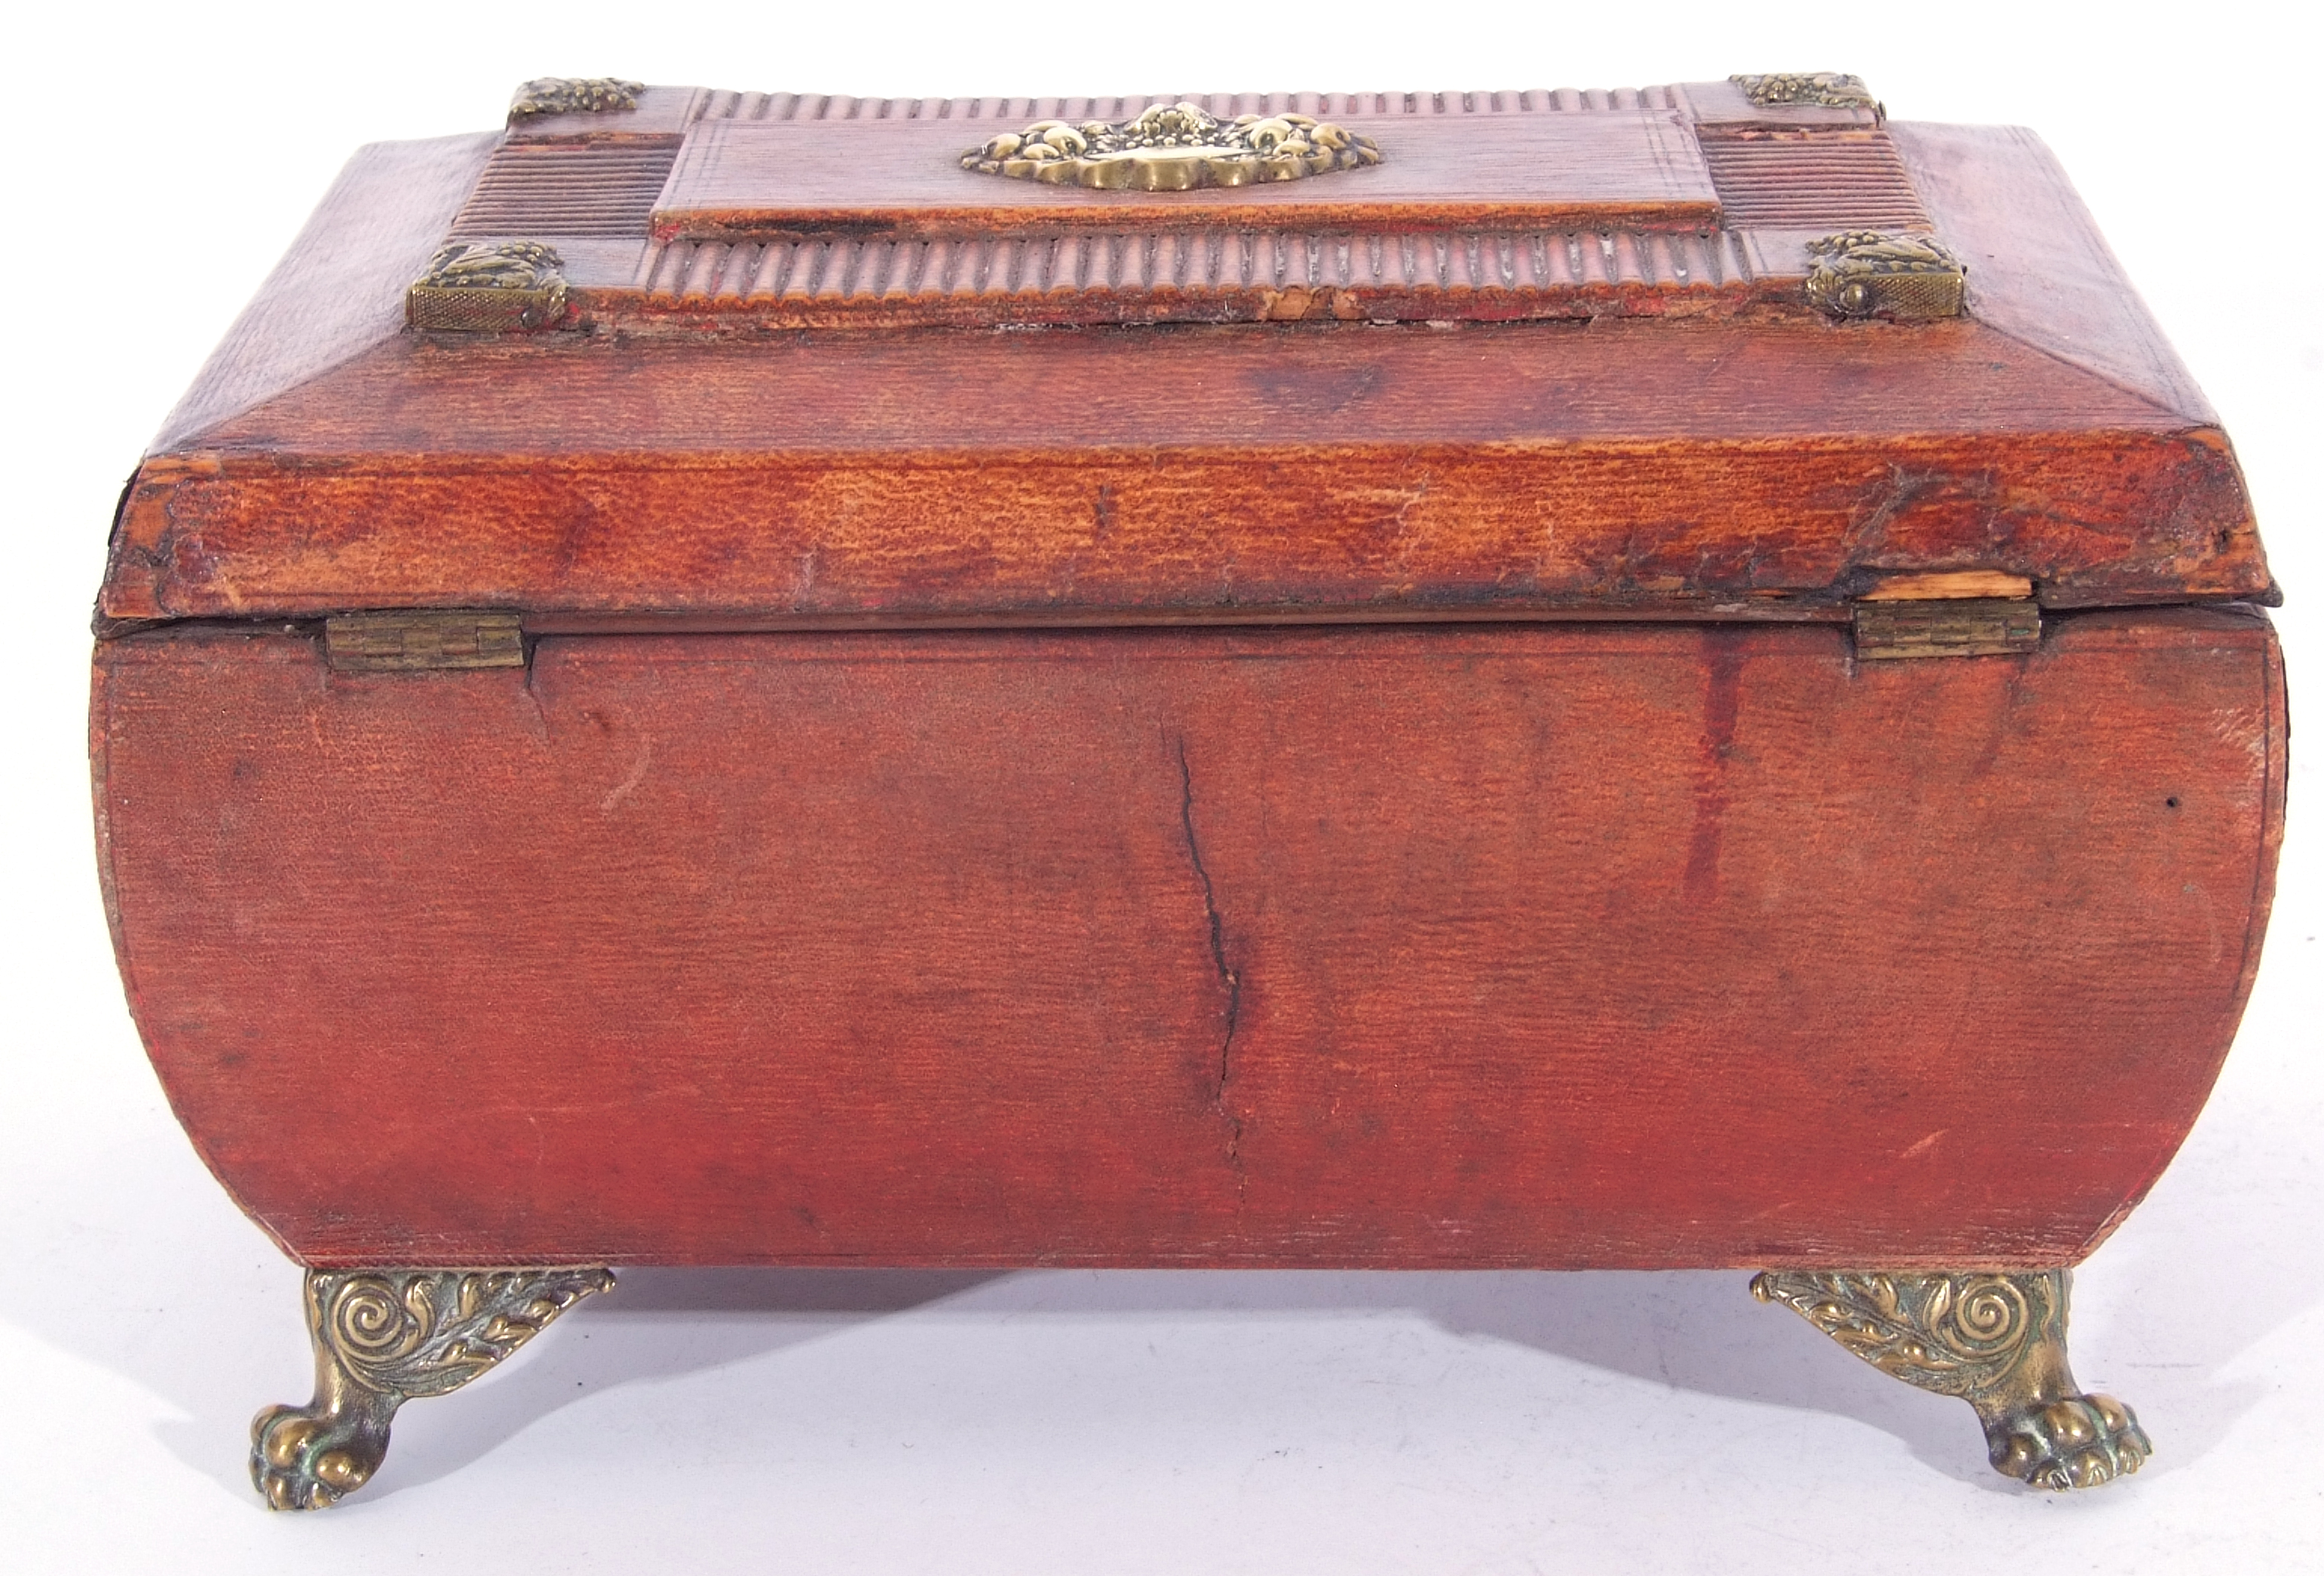 Regency red leather and brass embossed jewel box, hinged lid with silk lined interior, single drawer - Image 8 of 11